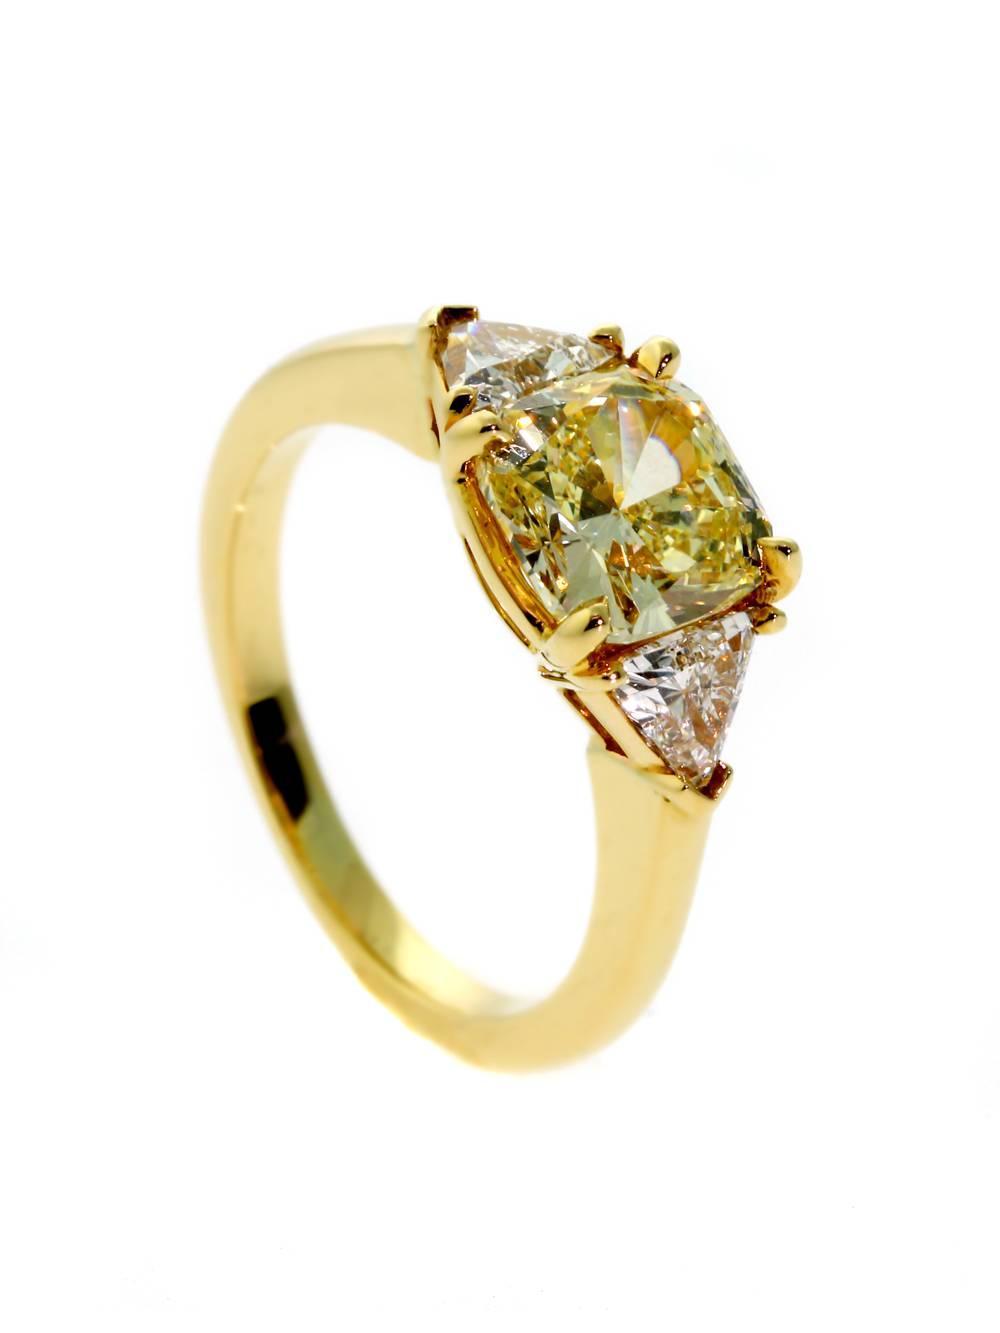 Cartier Fancy Intense Yellow Diamond Gold Ring For Sale at 1stdibs